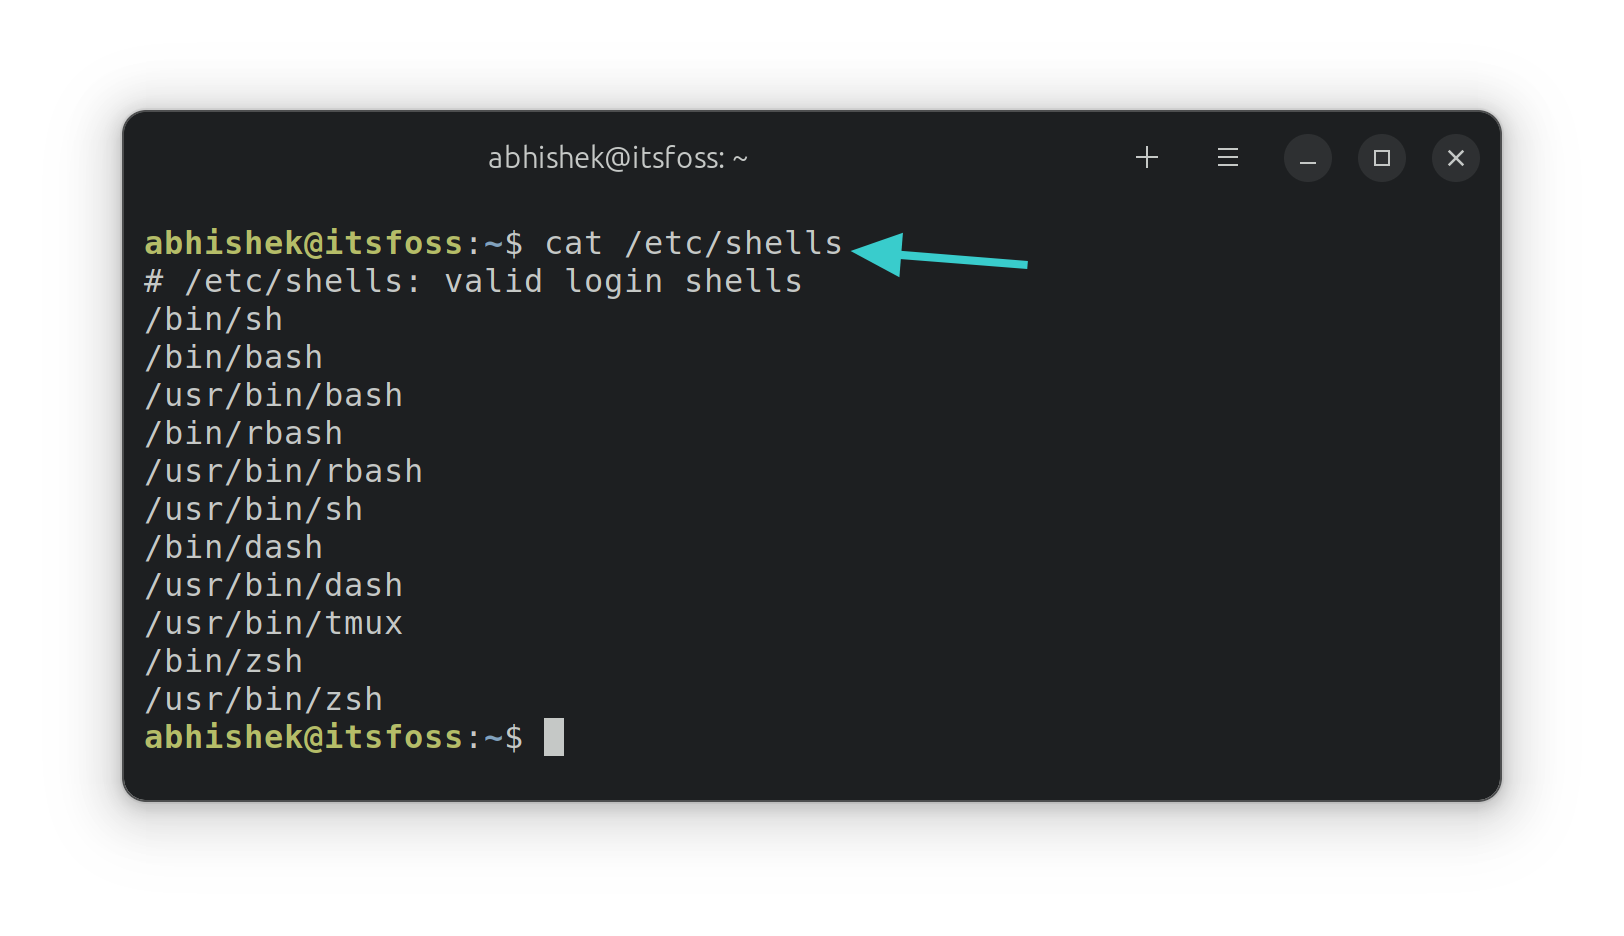 Available shells in Linux